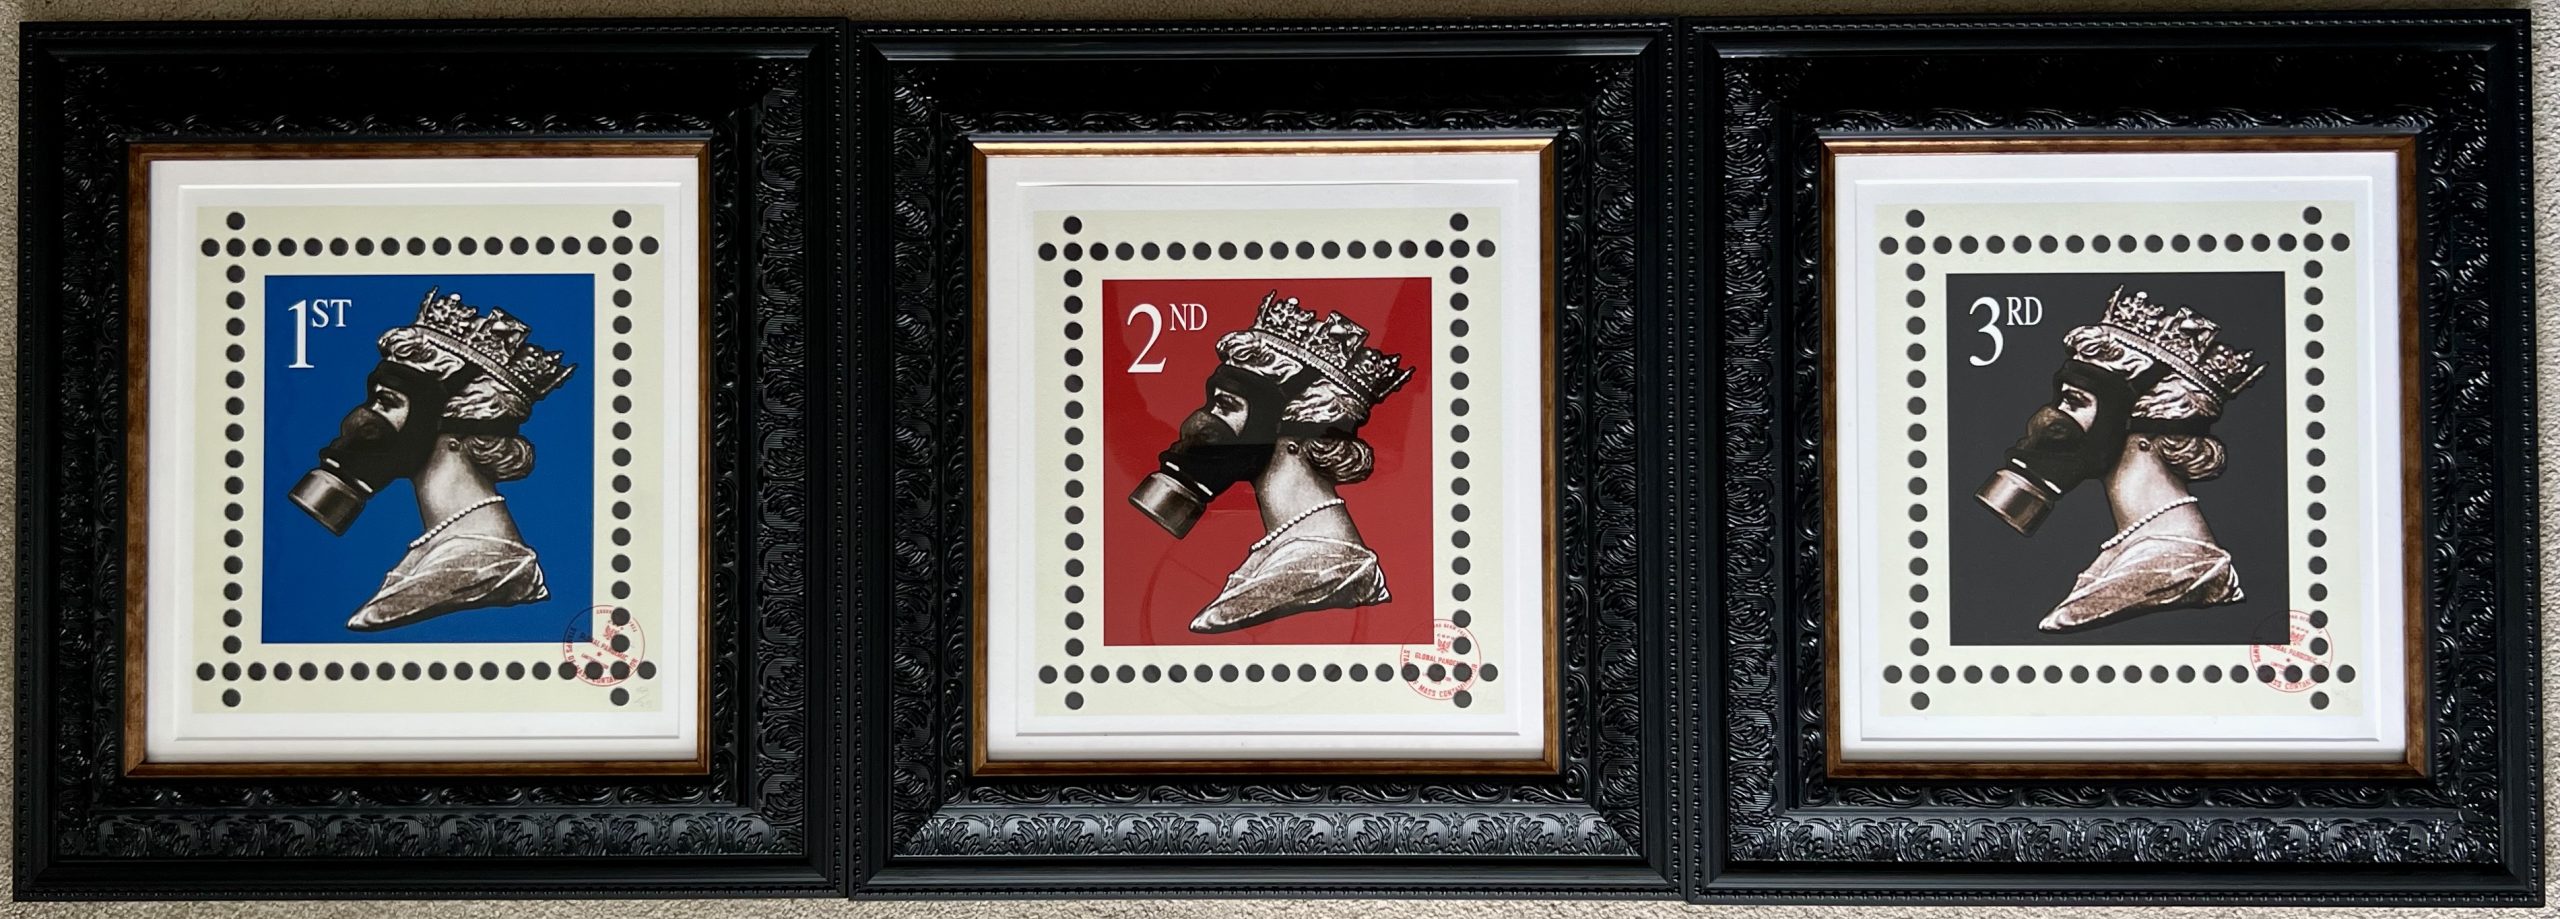 jimmy cauty stamps of covidian culture framed set